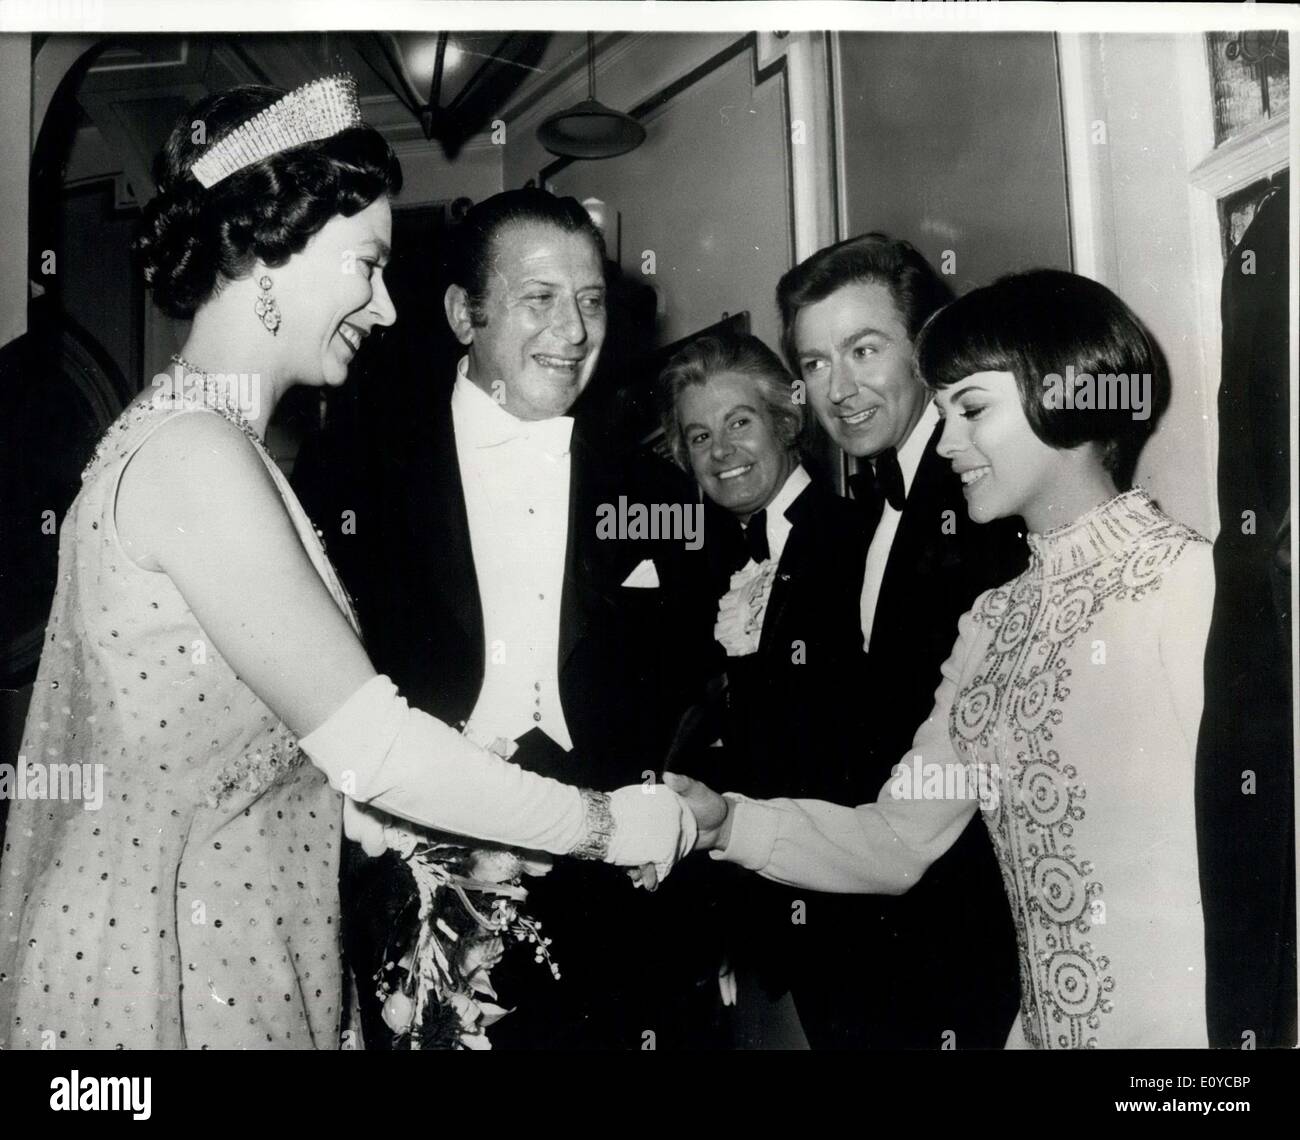 Nov. 11, 1969 - The Royal Variety Performance At The London Palladium: The Queen, accompanied by Prince Philip and Princess Anne, last night attended the Royal Variety Performance at the London Palladium. Photo shows The Queen is introduced to French singer Mireille Mathieu by Bernard Delfont (centre) when she met the stars of last night's show. Also seen looking on are female impersonater, Danny La Rue and compere Des O'Connor (next to Mireille) Stock Photo